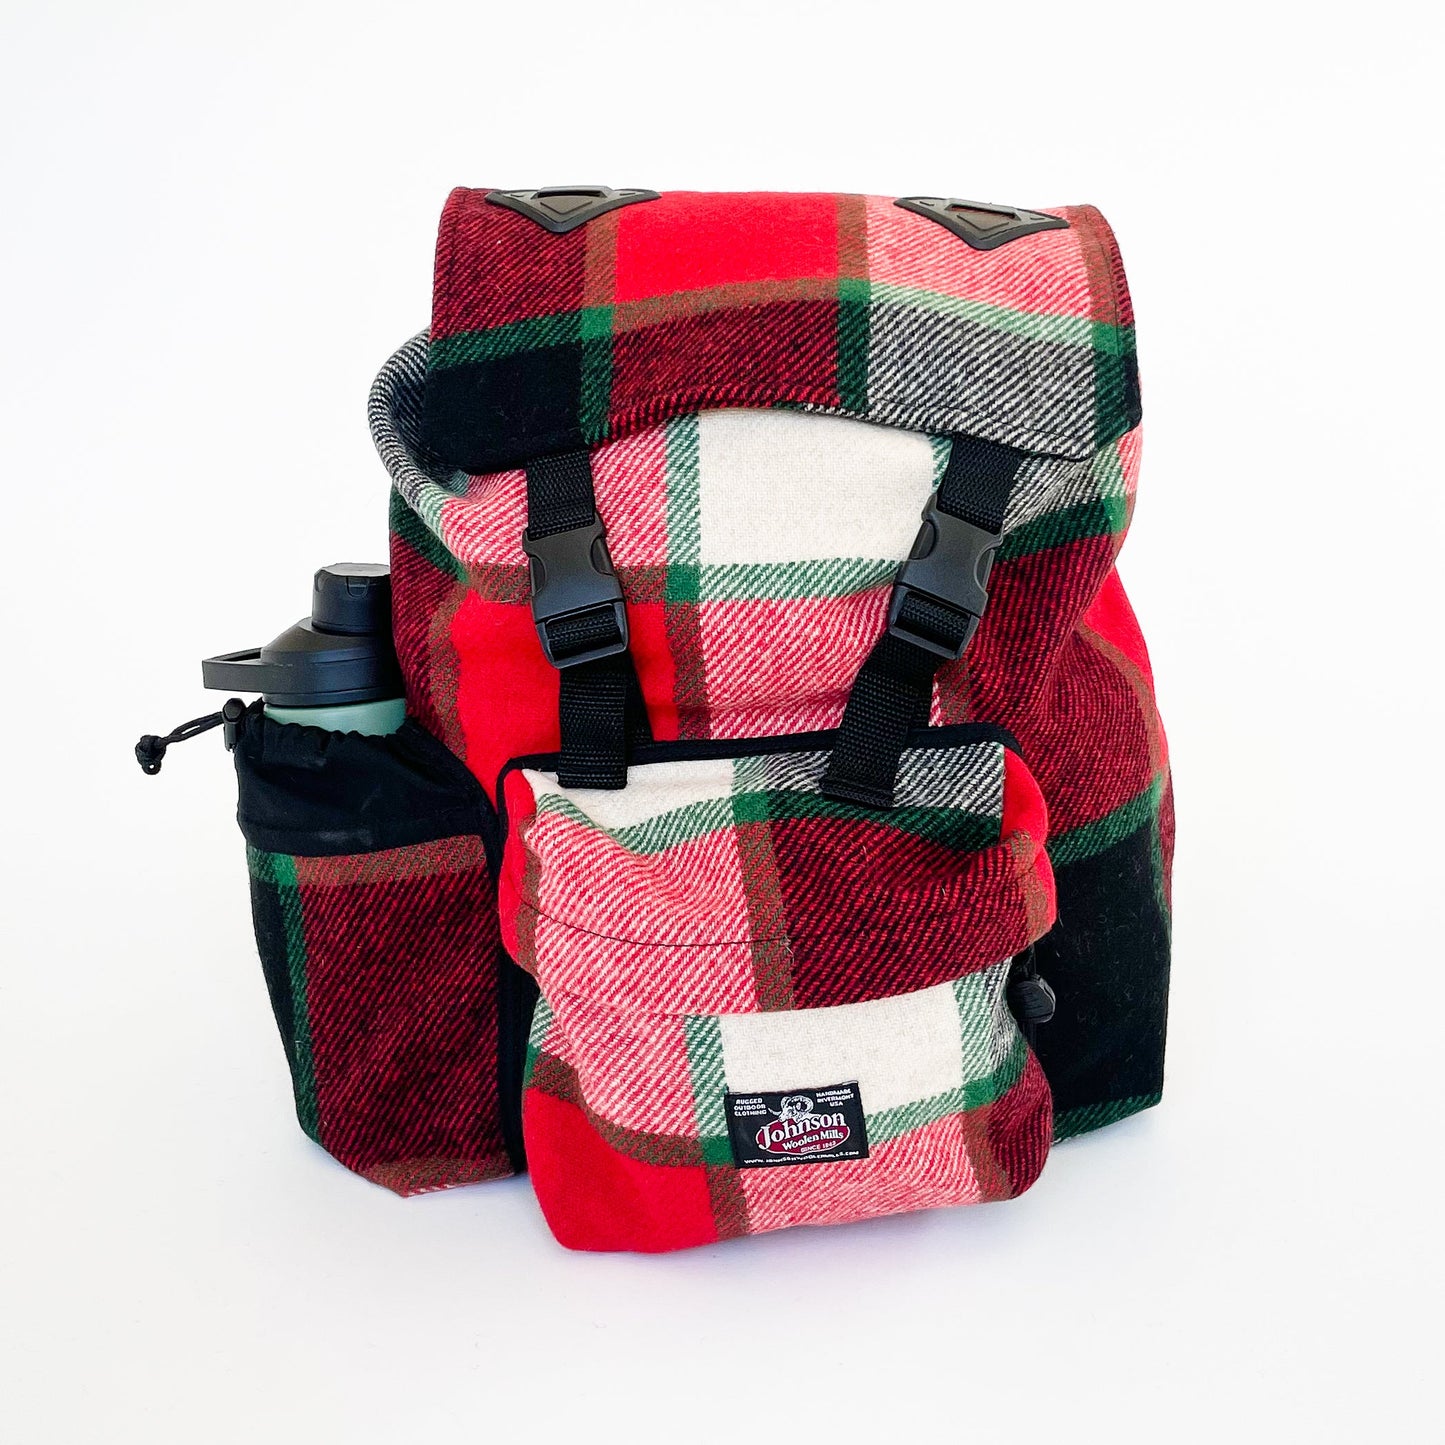 Johnson Woolen Mills Daypack Canadian Plaid Red/Pink/Green/White/ front view with water bottle in side pocket